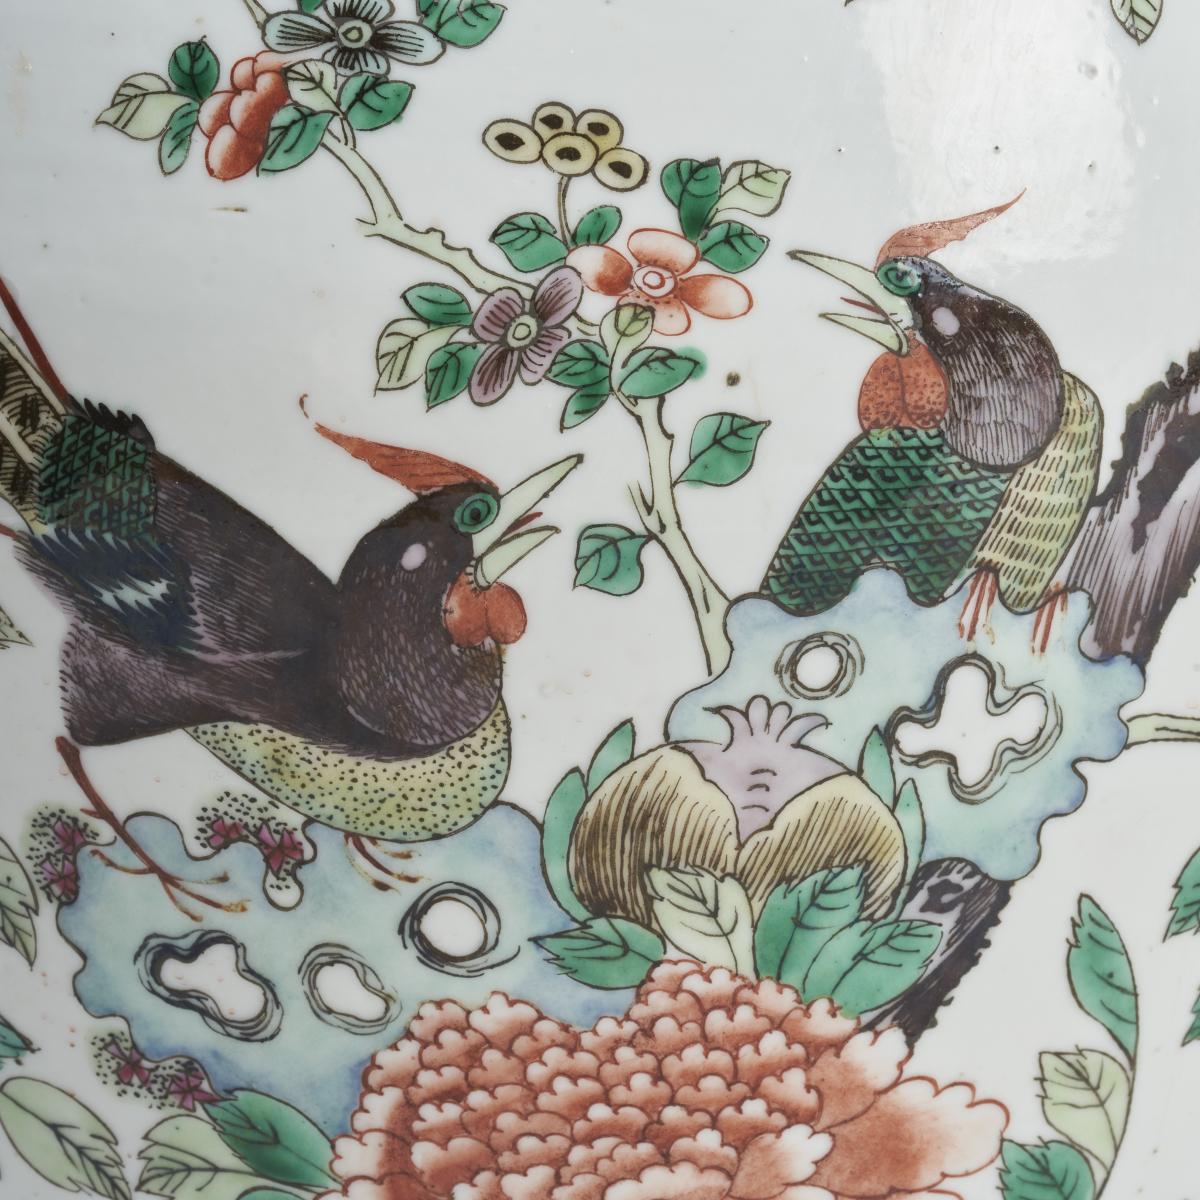 Nineteenth Century Chinese porcelain jars and covers